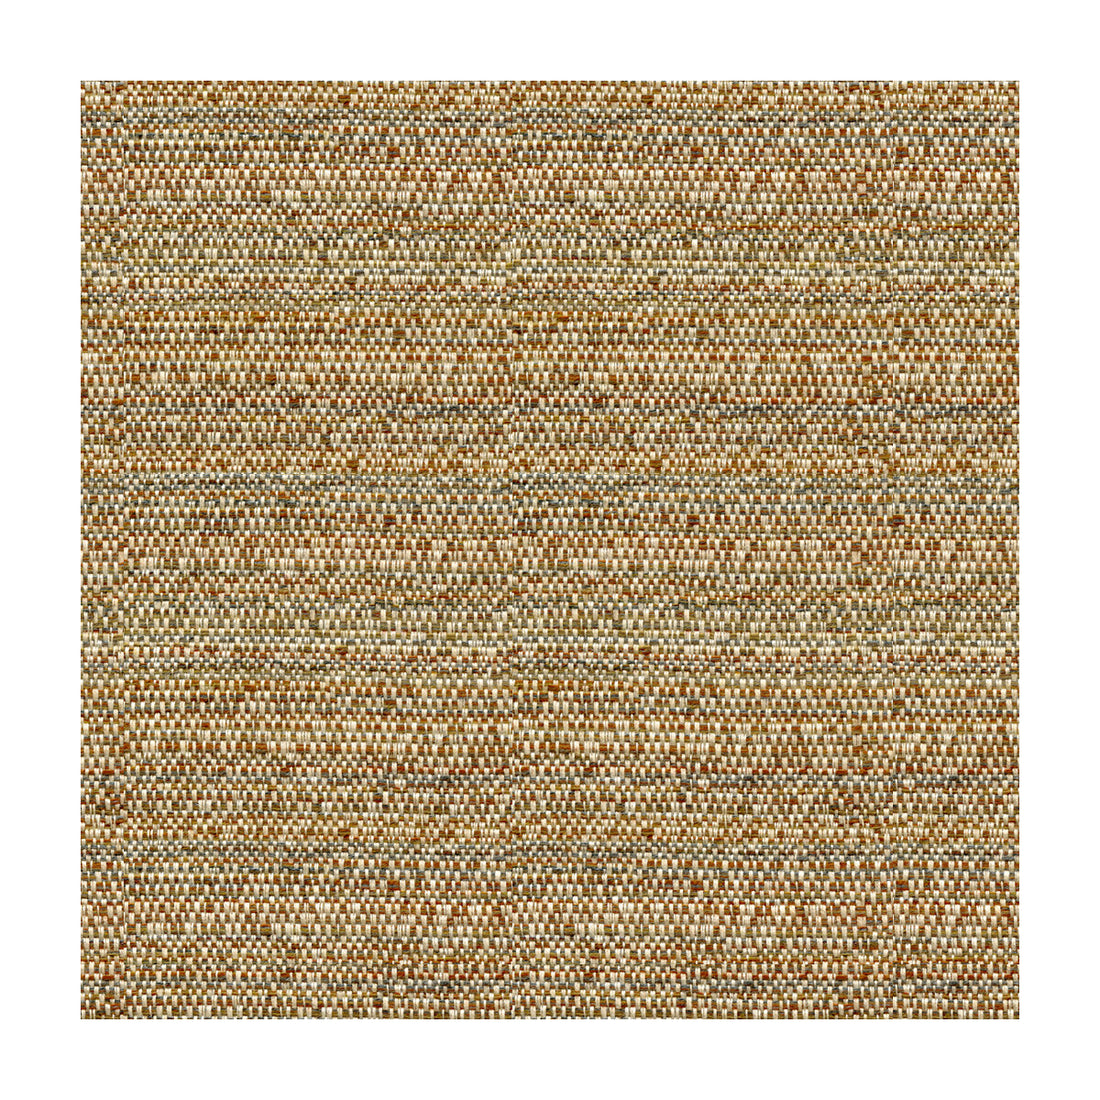 Kravet Couture fabric in 34274-616 color - pattern 34274.616.0 - by Kravet Couture in the Sunbrella collection